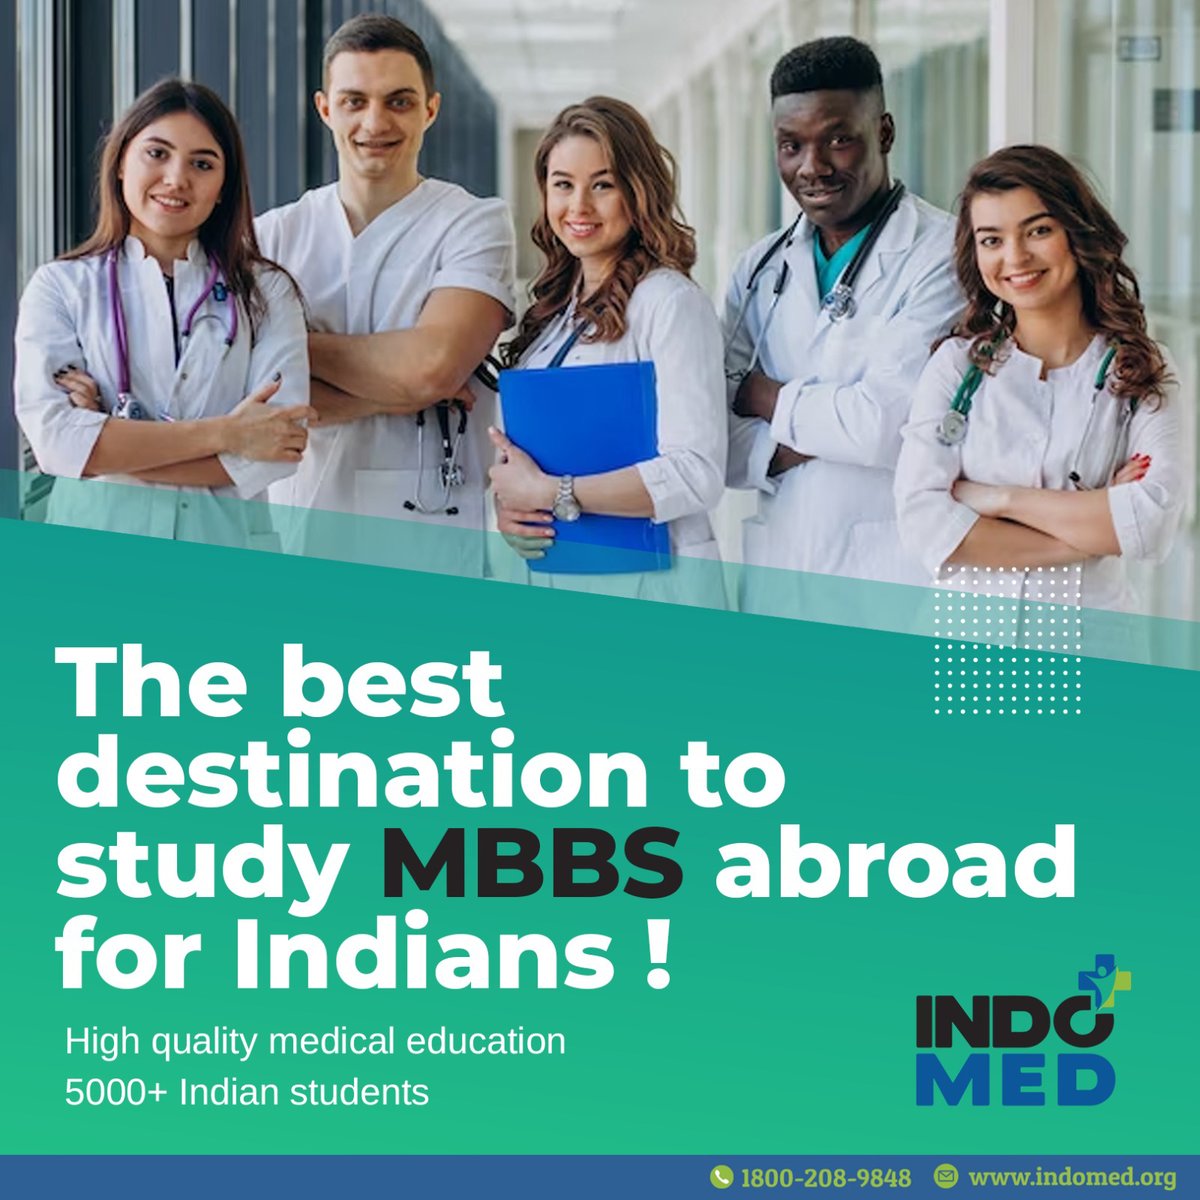 Study MBBS in the Philippines - Your Path to Excellence
#studymbbsabroad #studymbbs #studymbbsinabroad #studyMBBSinGeorgia #studymbbsinkazakhstan #studymbbsinuzbekistan #studymbbsinphilippines #mbbsabroad #mbbsabroad2023 #mbbsabroadadmission #mbbsinphilippines #indomededucare